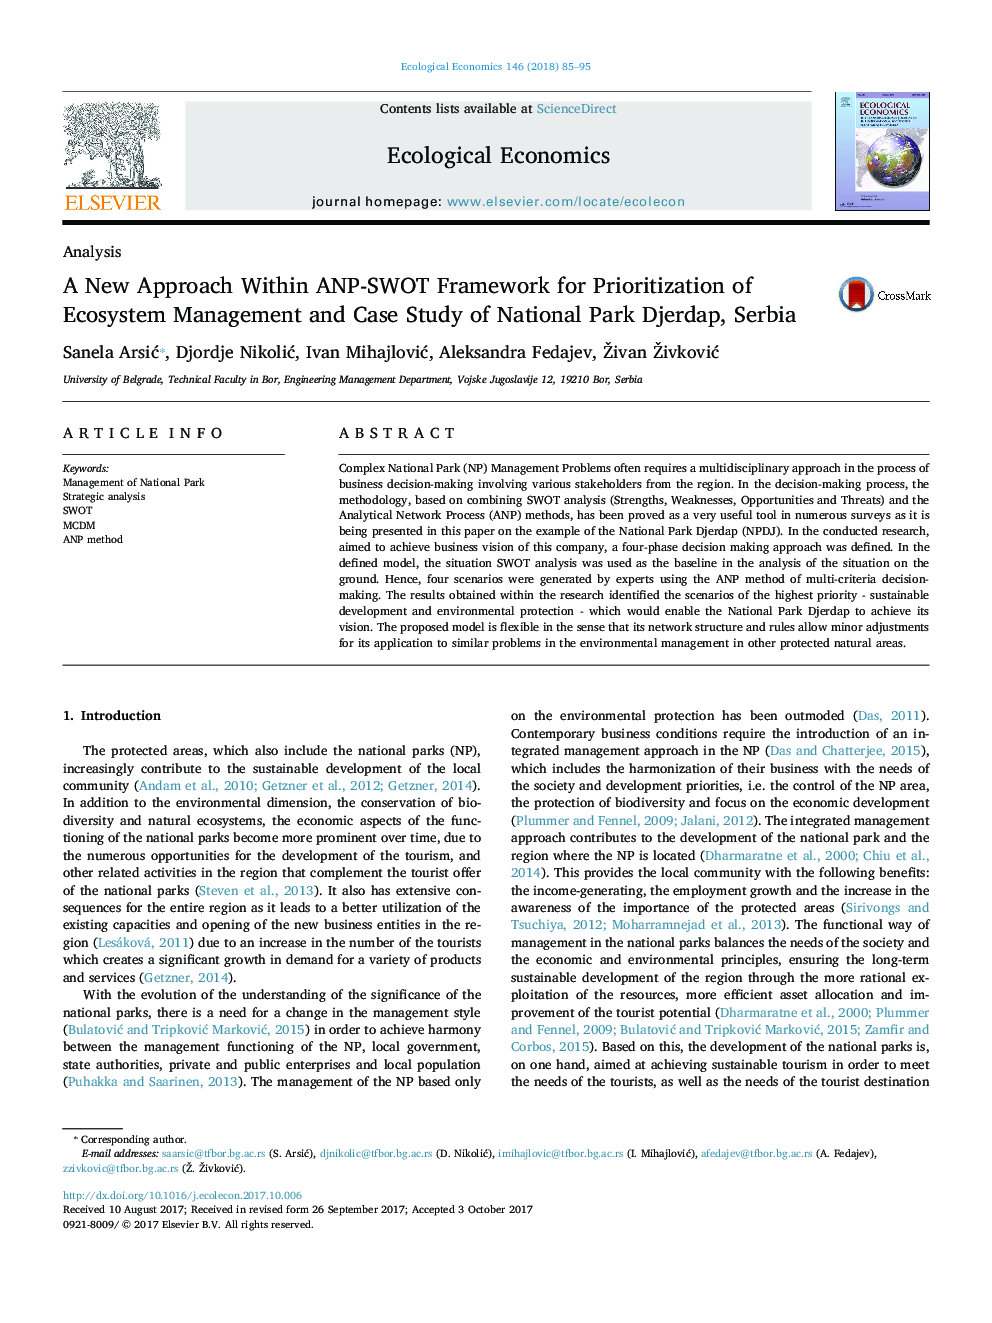 A New Approach Within ANP-SWOT Framework for Prioritization of Ecosystem Management and Case Study of National Park Djerdap, Serbia